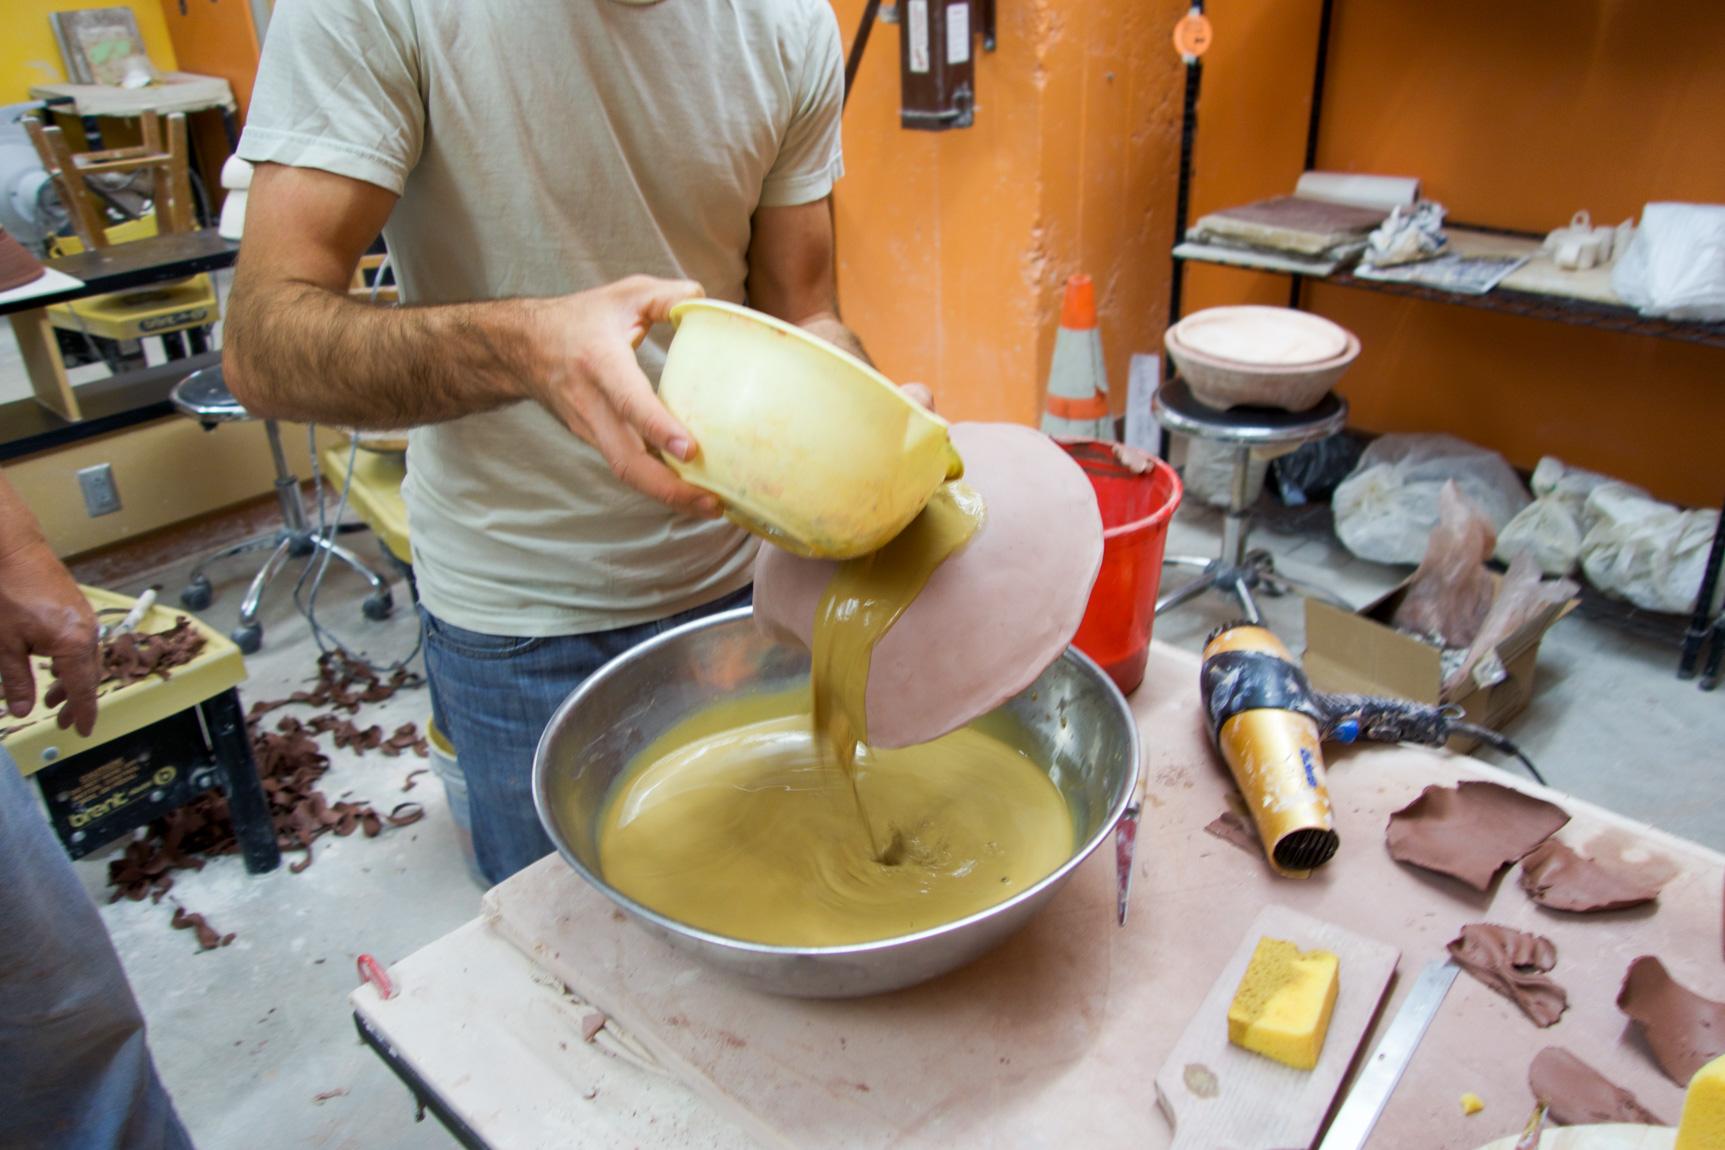 Chris Kallmyer pouring glaze over a clay instrument in his studio.